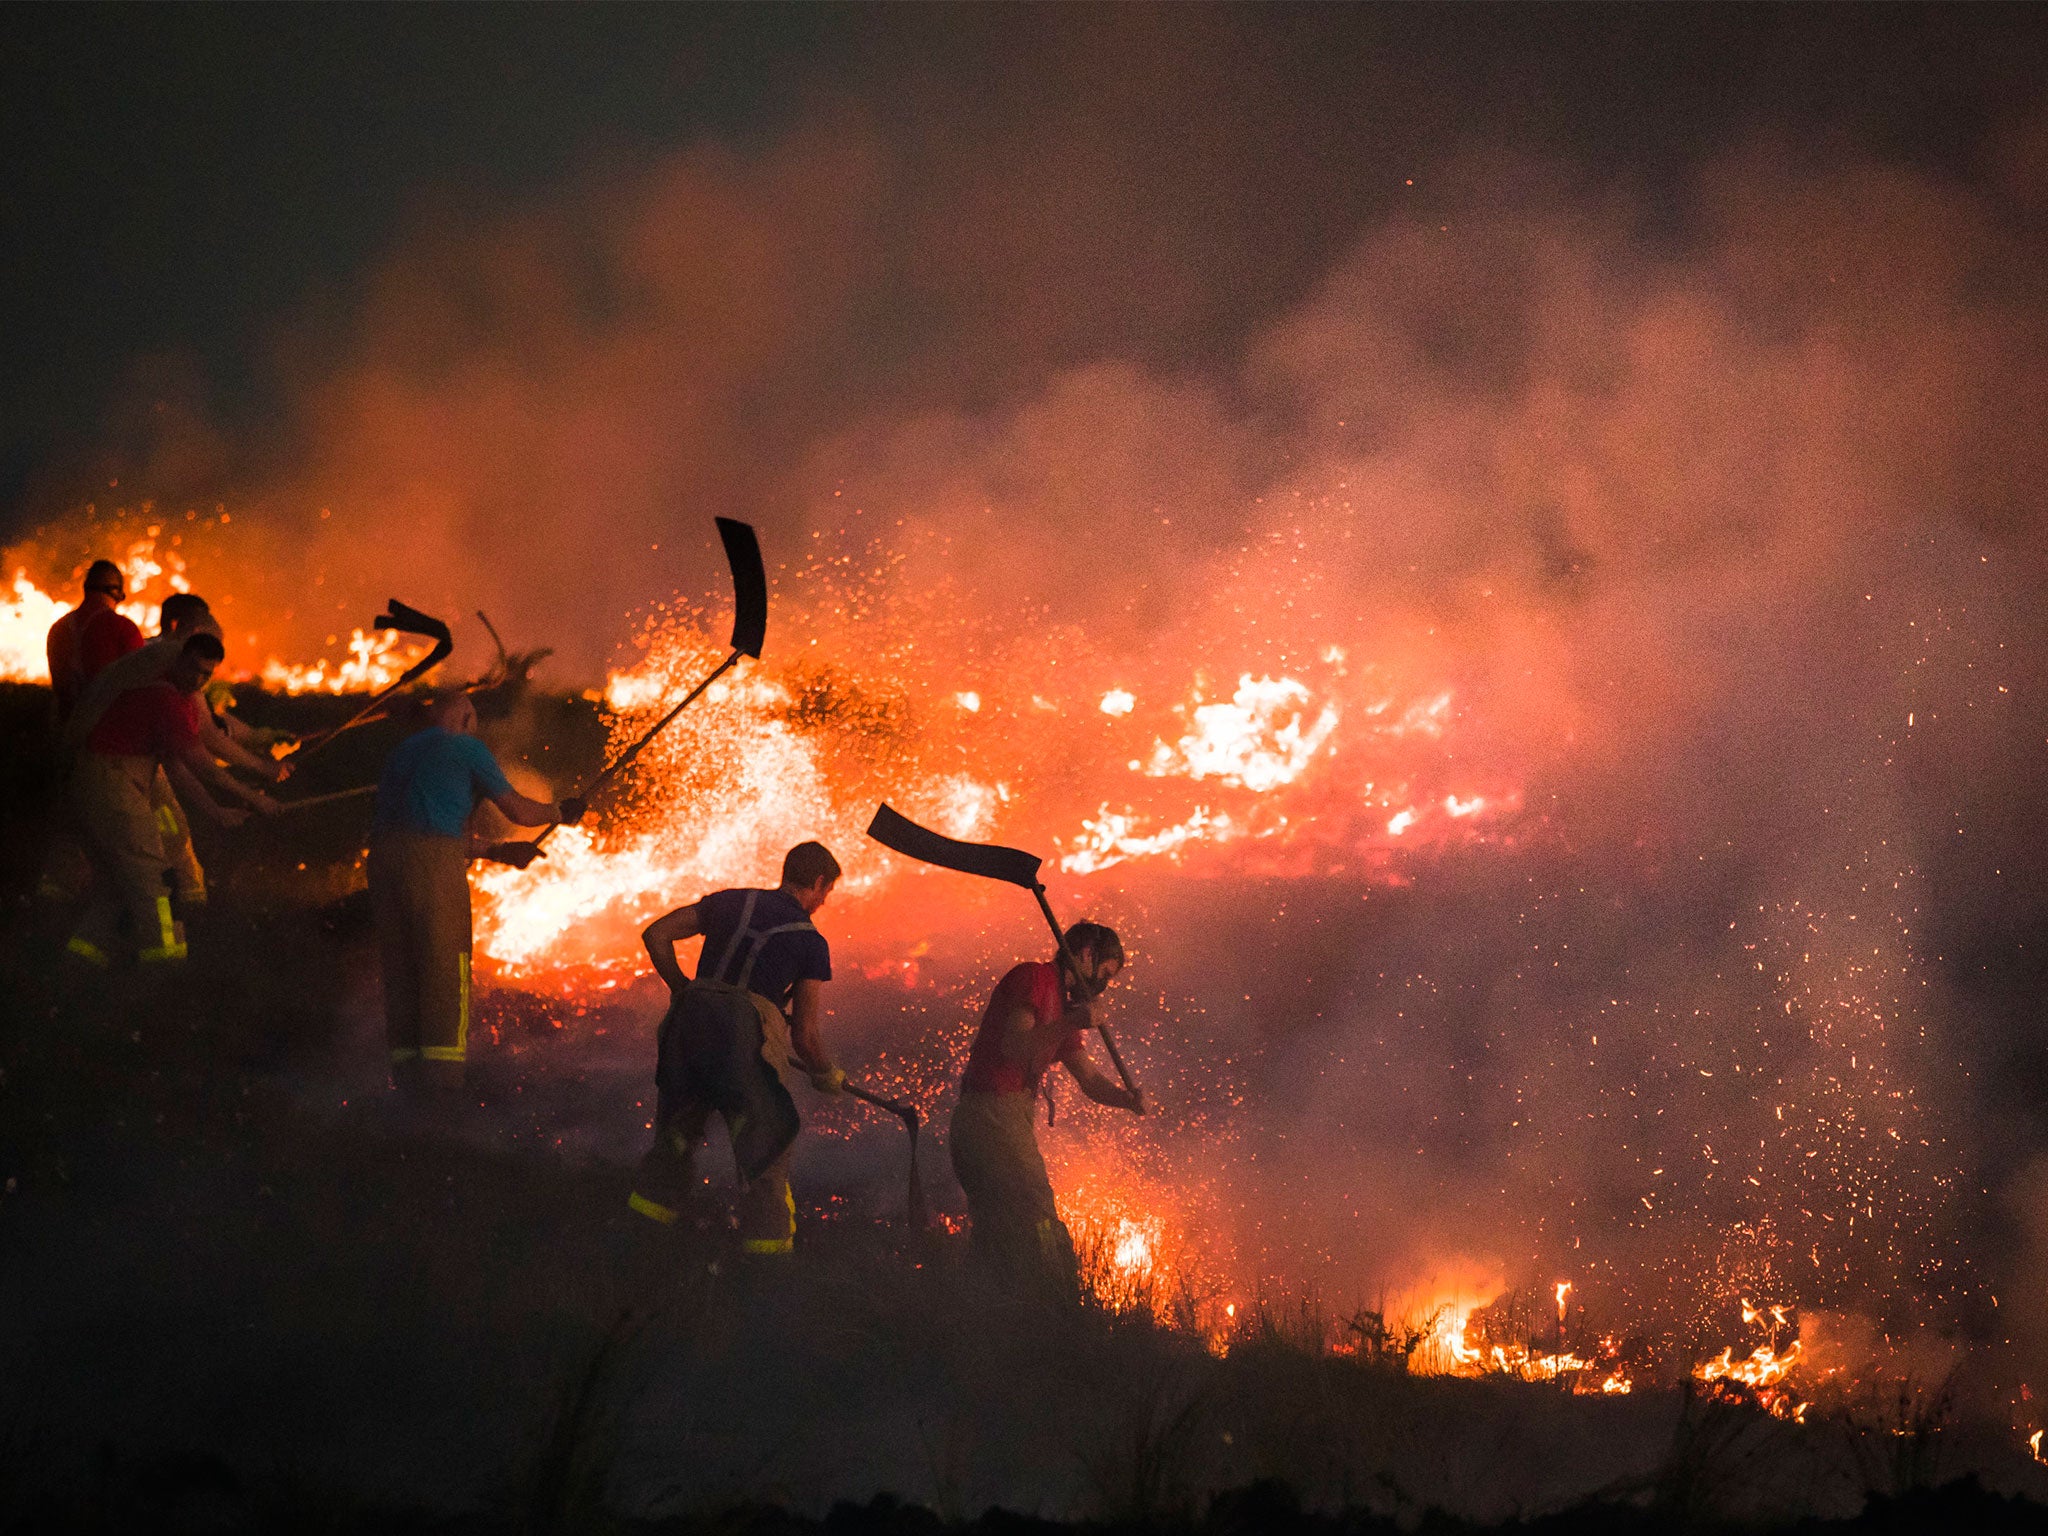 Wildfires raged across Saddleworth Moor in West Yorkshire amid a heatwave in 2018